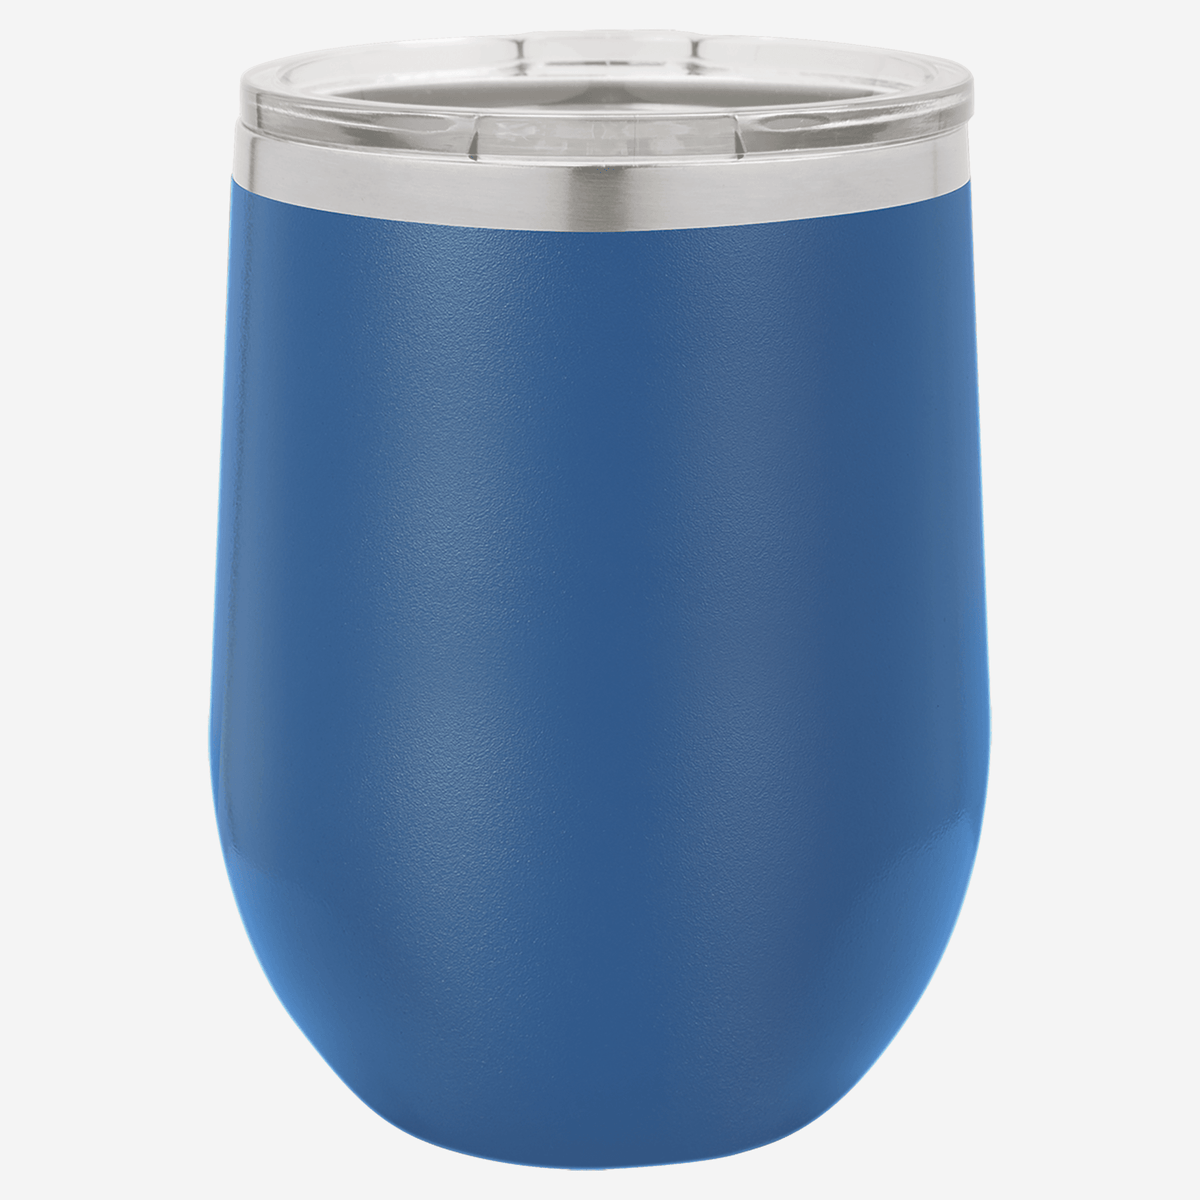 12 oz. royal blue stainless steel tumbler with clear lid